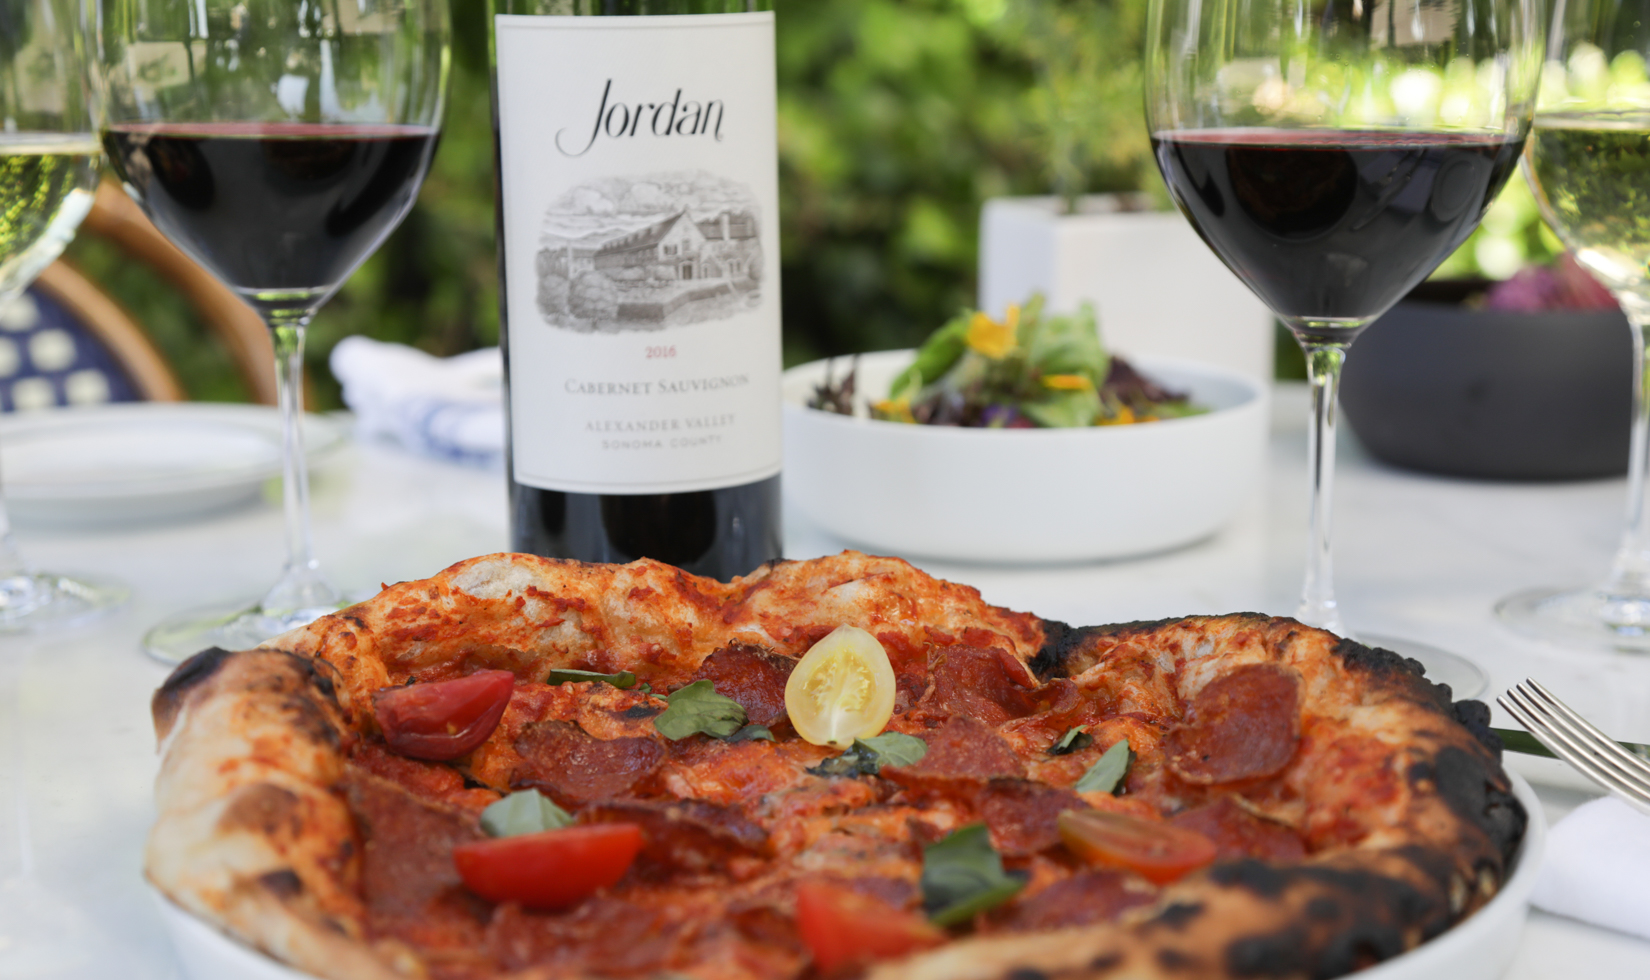 freshly made pizza on plate on table with bottle of jordan cabernet sauvignon